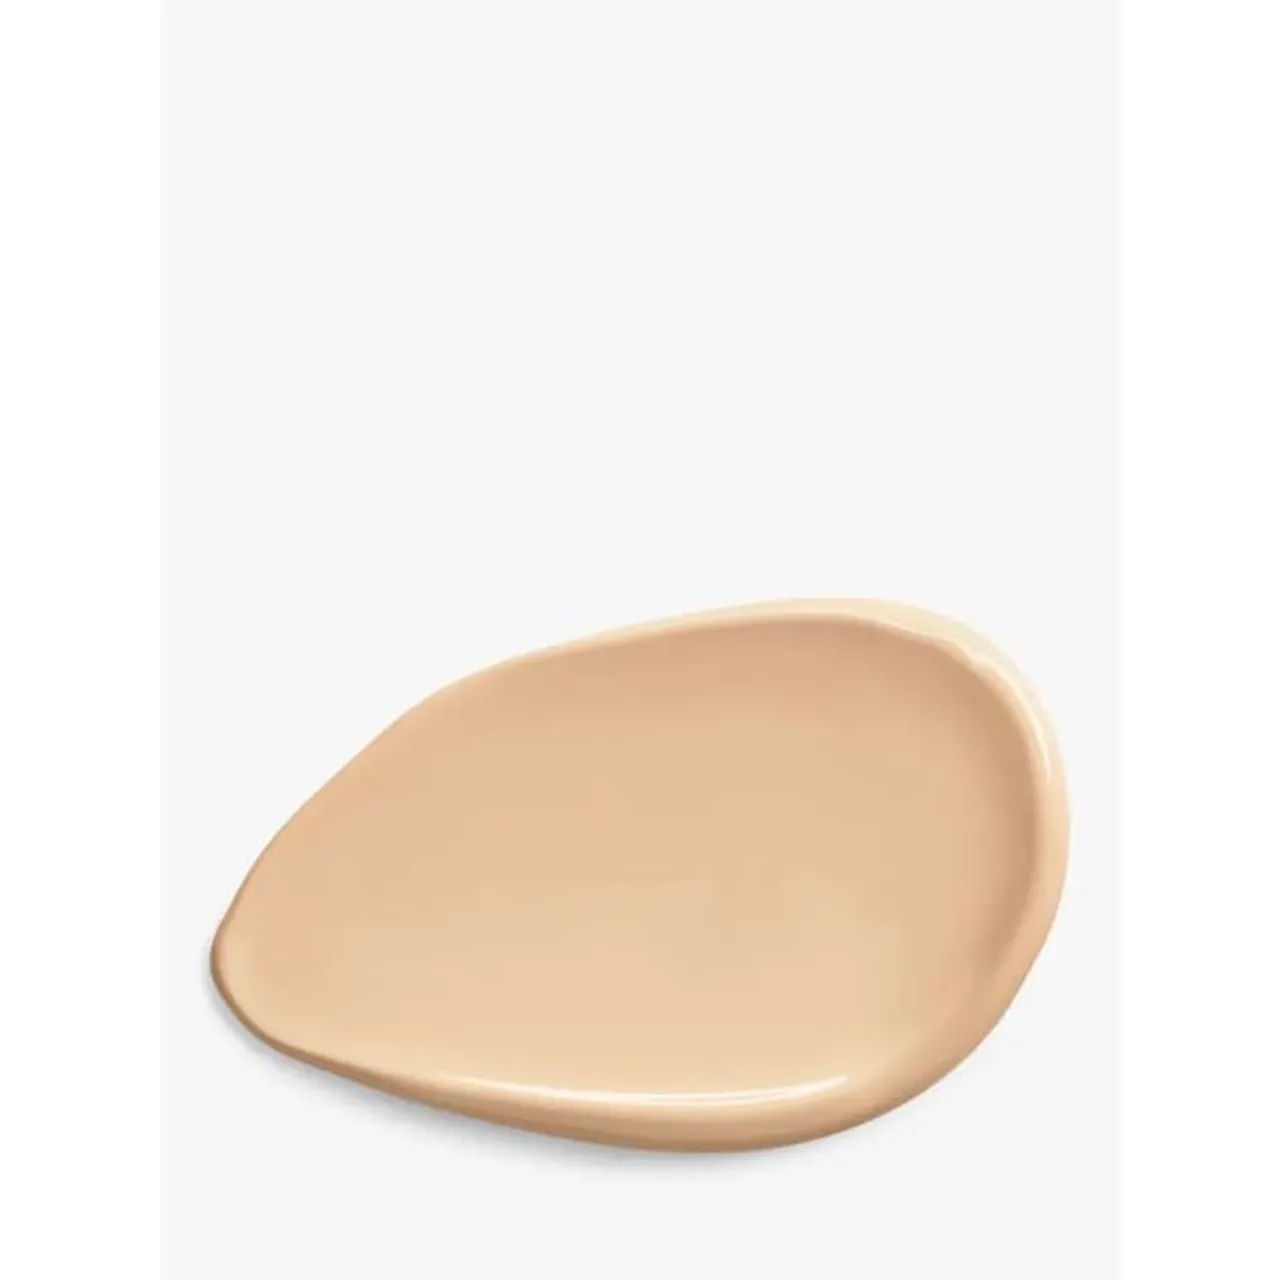 Clarins Everlasting Long-Wearing & Hydrating Matte Foundation - 105N Nude - Unisex - Size: 30ml